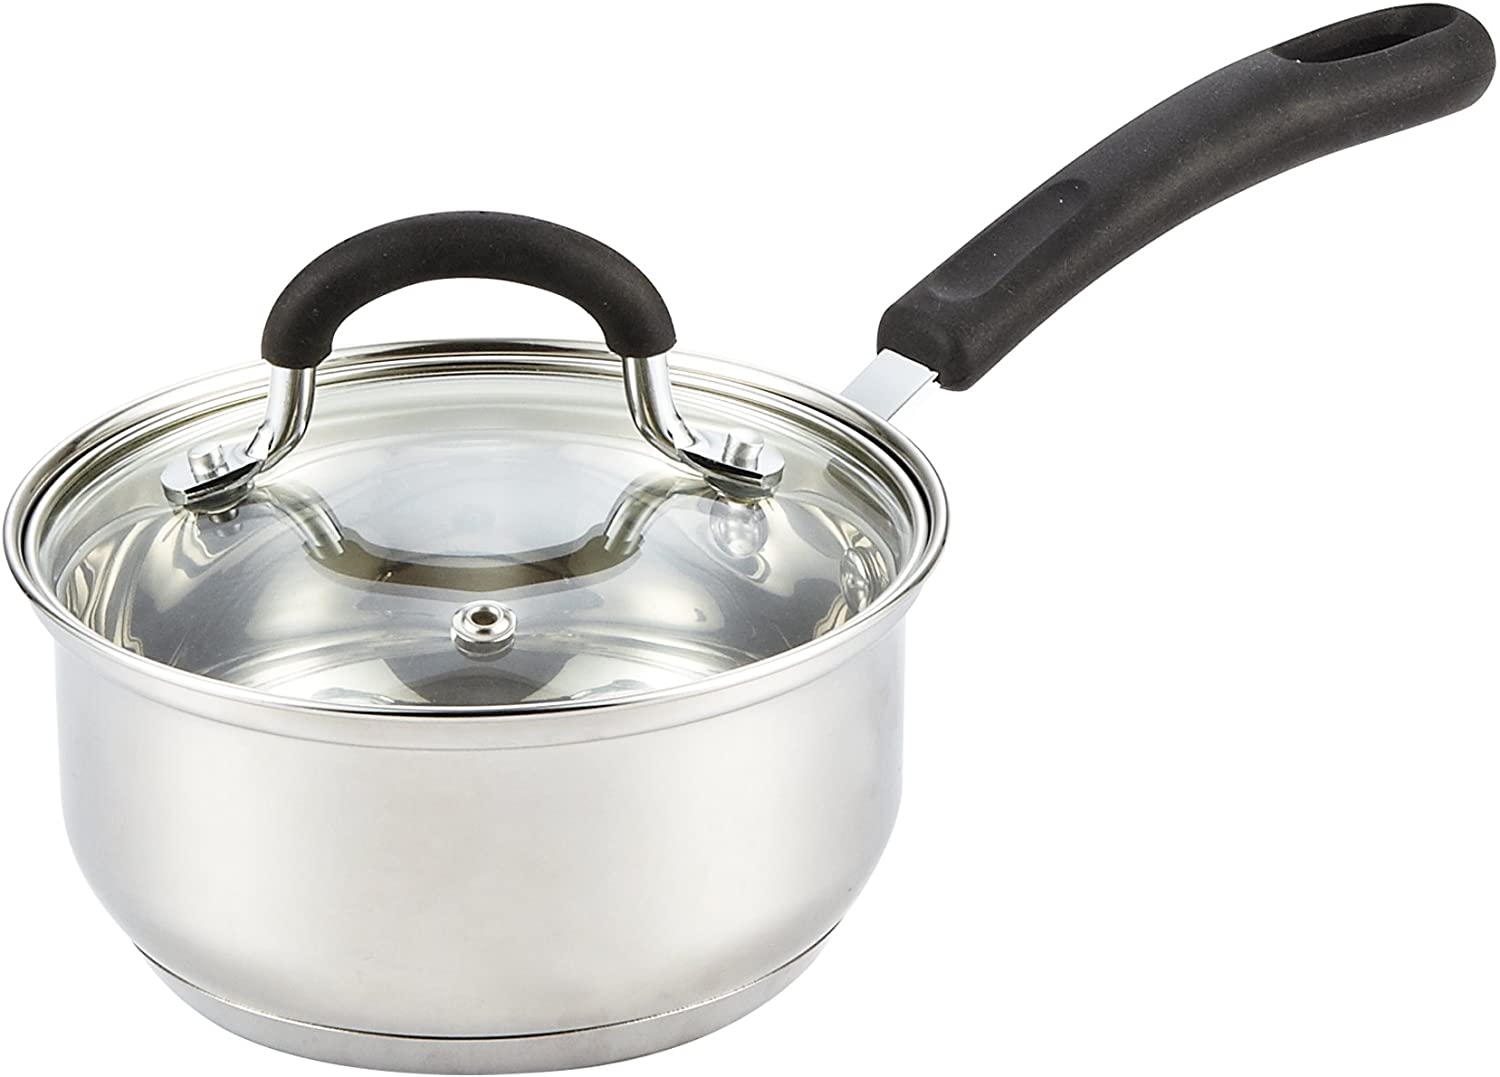 Cook N Home Professional Stainless Steel 8 Quart Stockpot Sauce